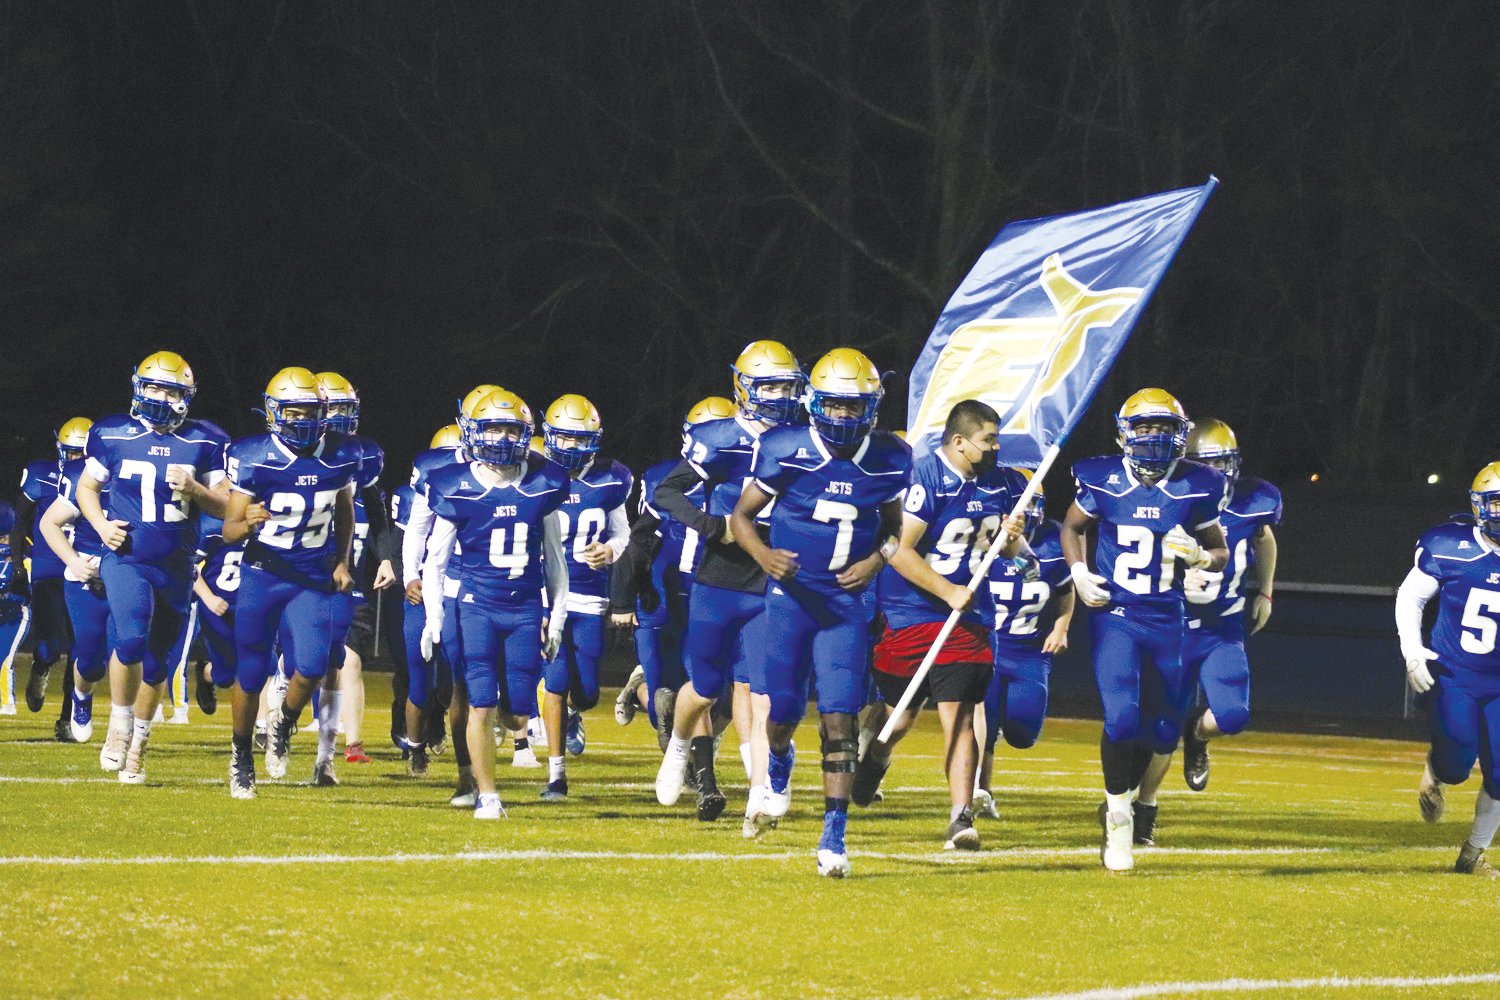 Led by senior quarterback Xavier Woods (7), the Jordan-Matthews' football team runs onto the field ahead of their 56-6 loss to Randleman on March 12, 2021. The new Siler City 14U Jets will act as a feeder program for J-M.